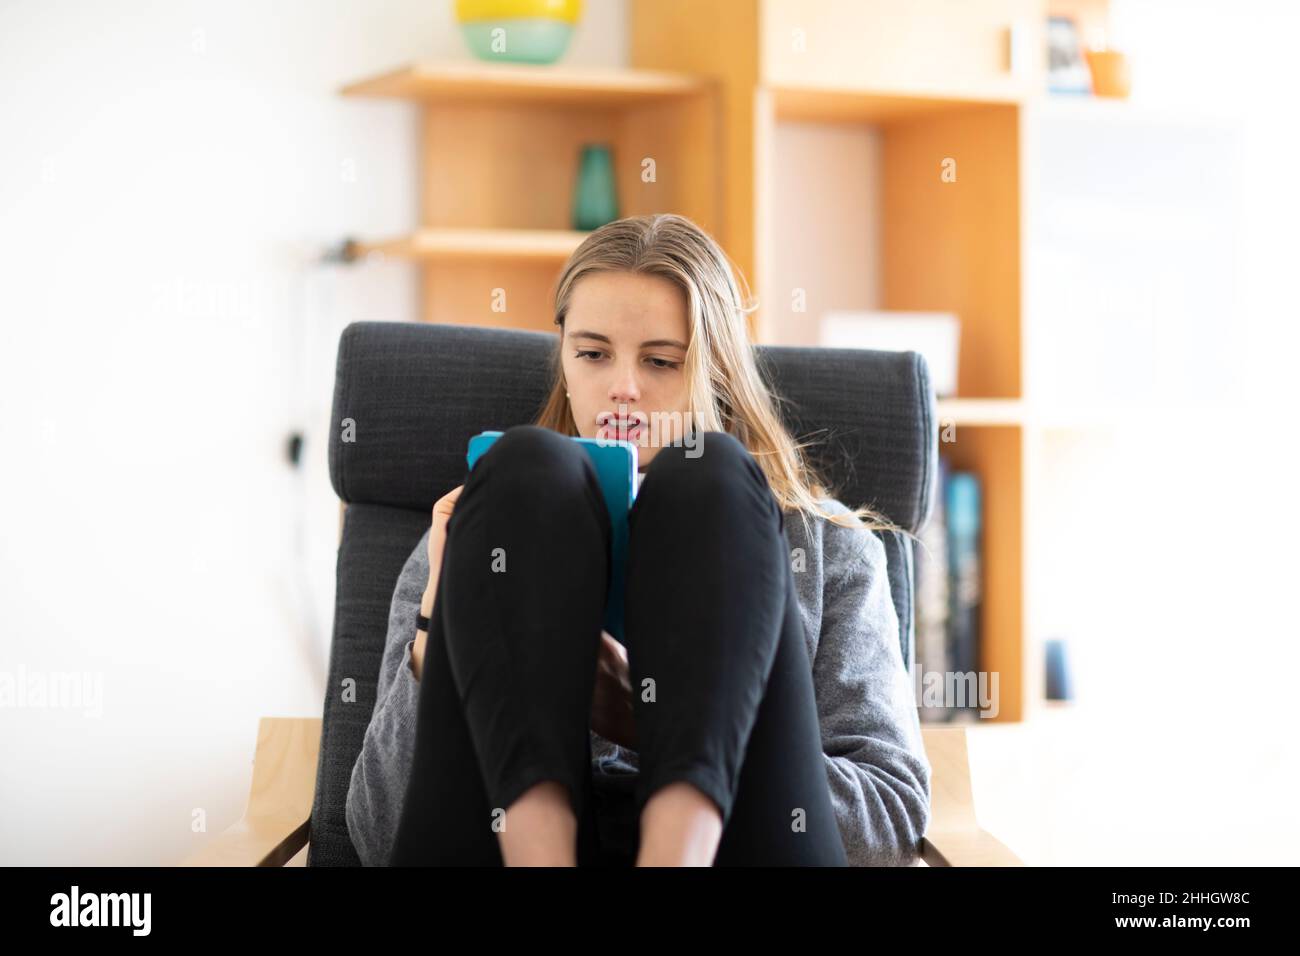 Young woman using digital tablet at home Stock Photo